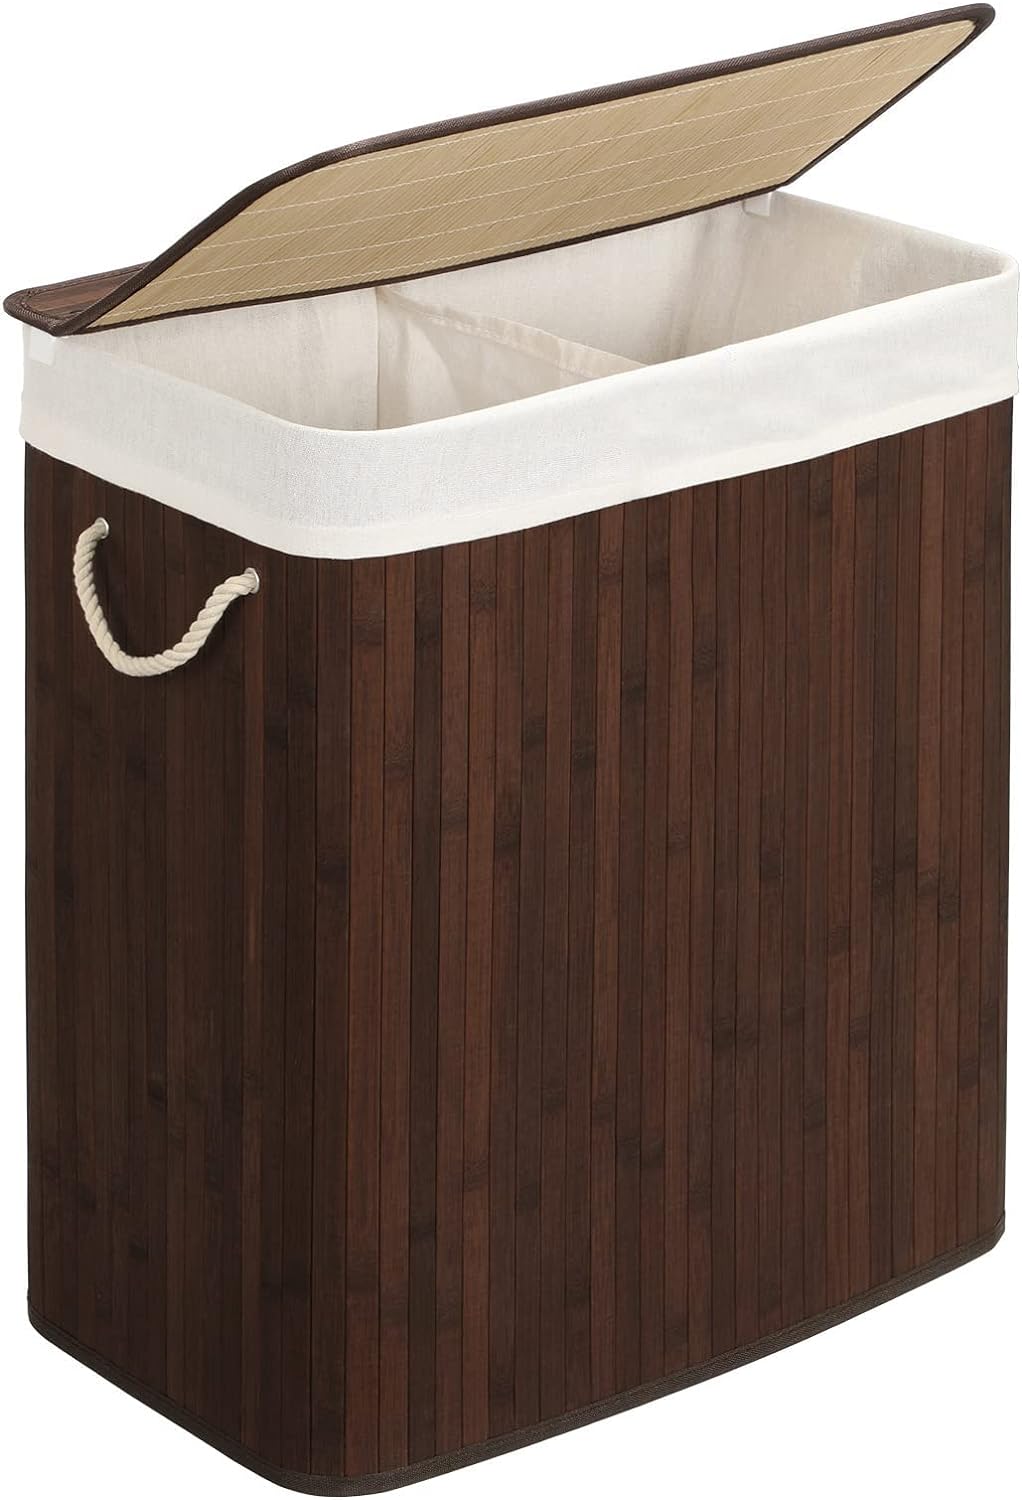 Laundry Basket with Lid, Bamboo Laundry Basket, Double Bamboo Laundry Hamper with 2 Sections, 100L, Brown, SONGMICS